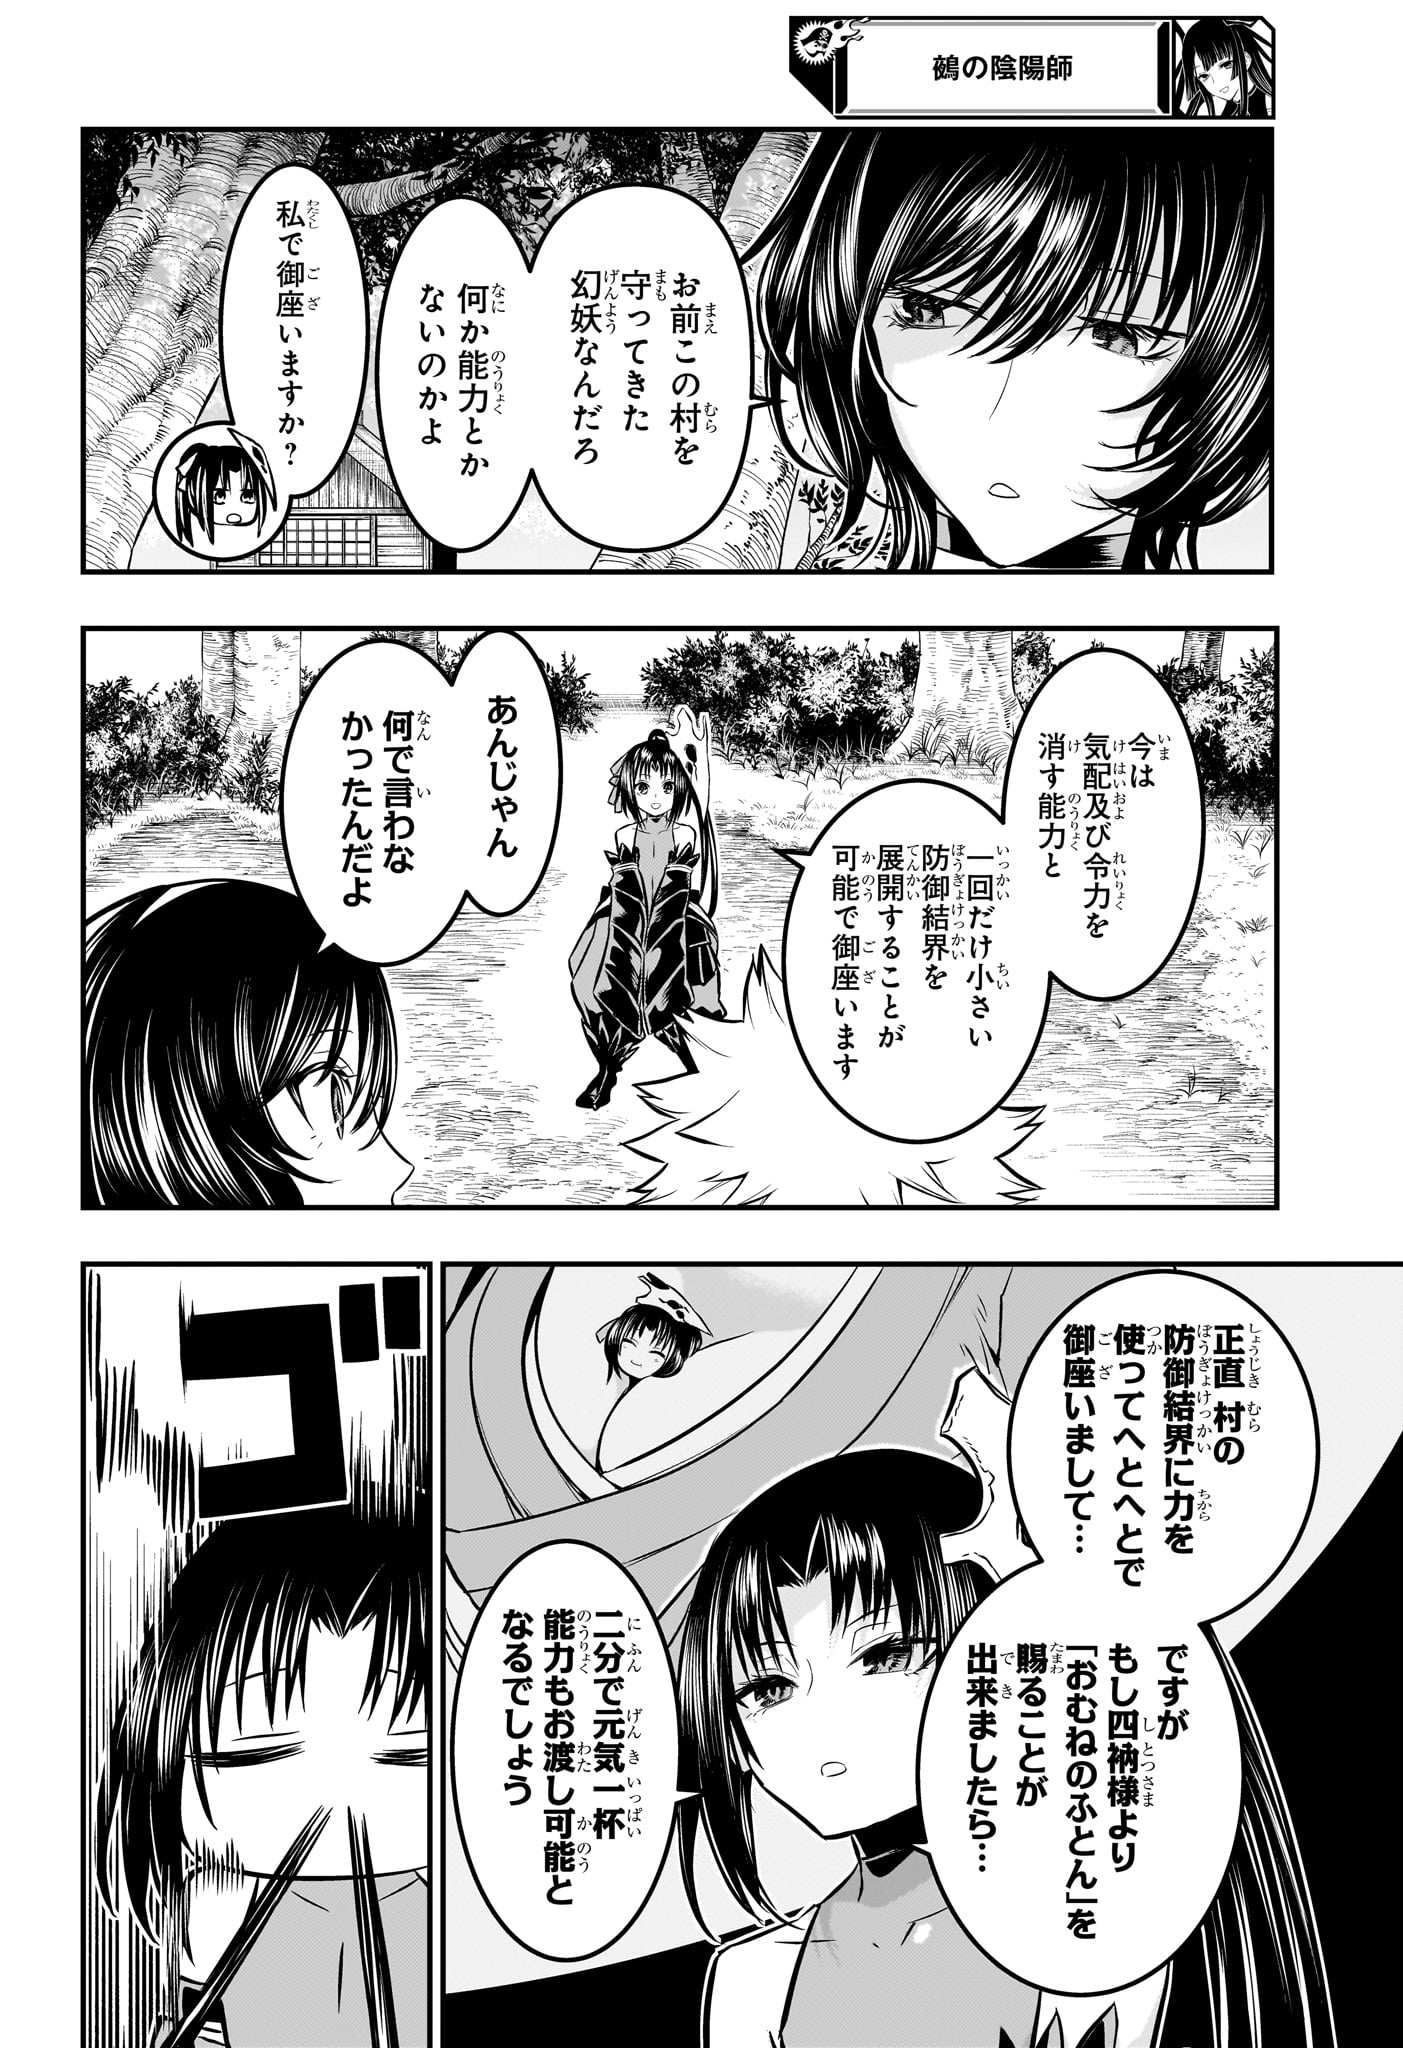 Nue no Onmyouji - Chapter 34 - Page 4